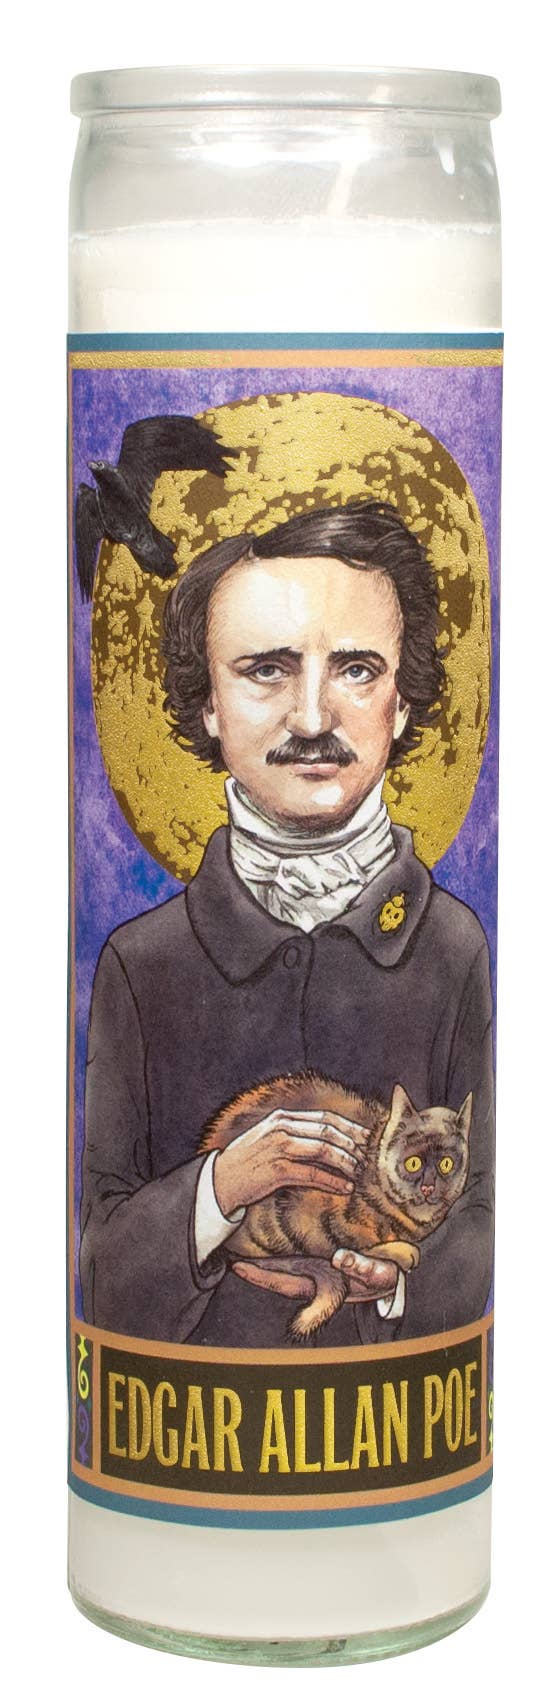 Edgar Allan Poe Secular Saint Candle from Unemployed Philosophers Guild